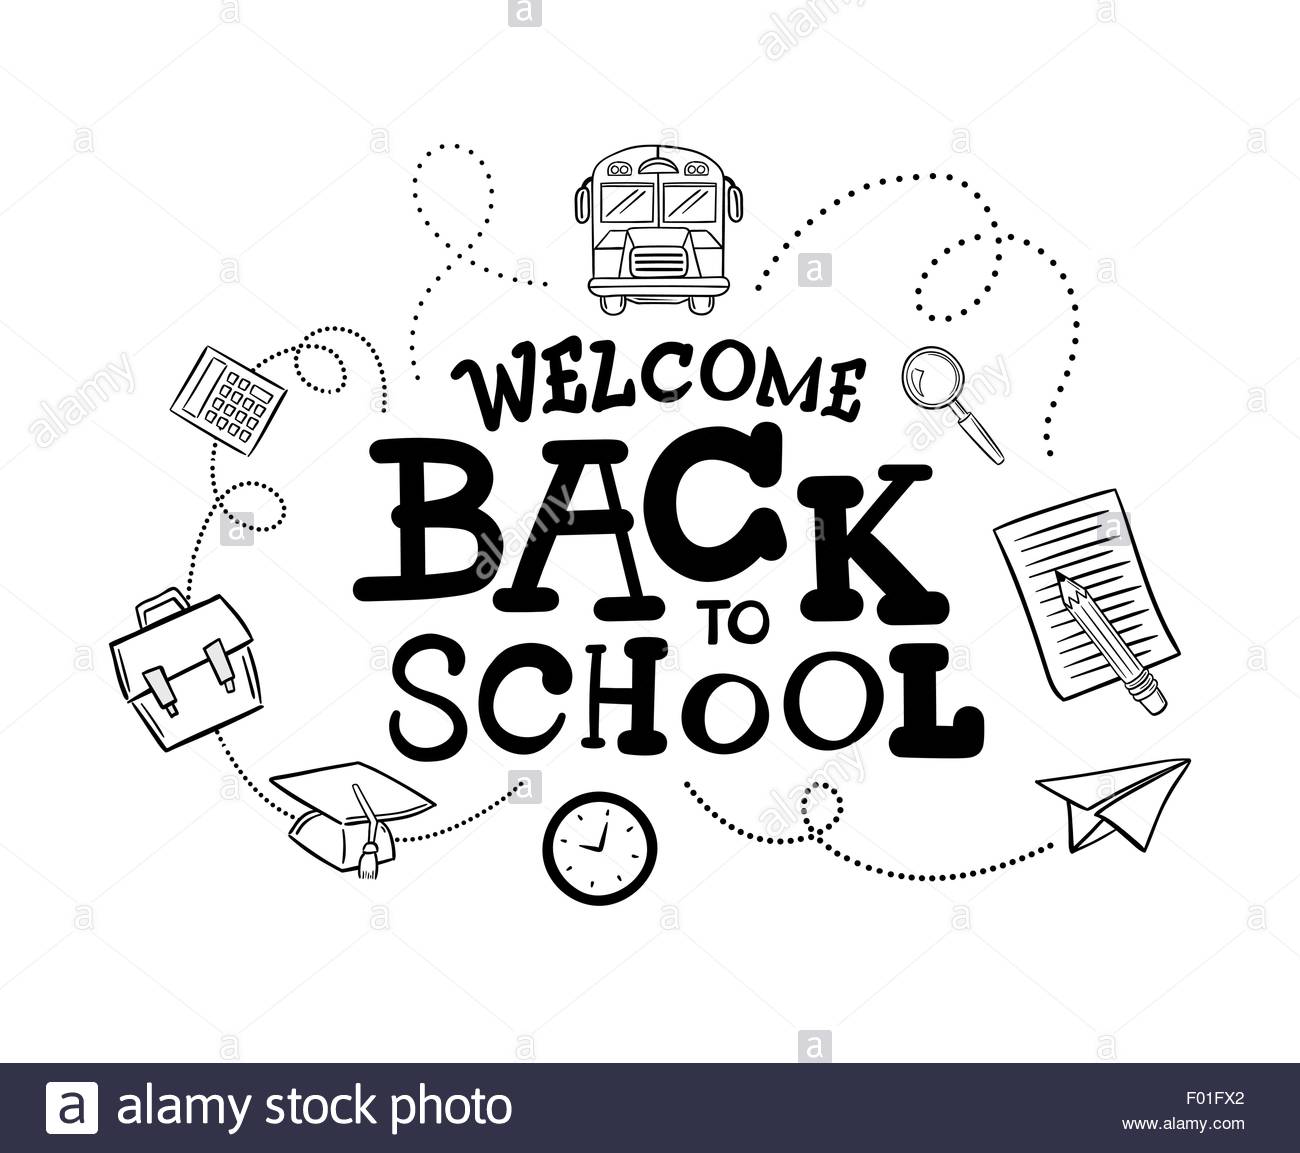 Welcome back to school clipart black and white